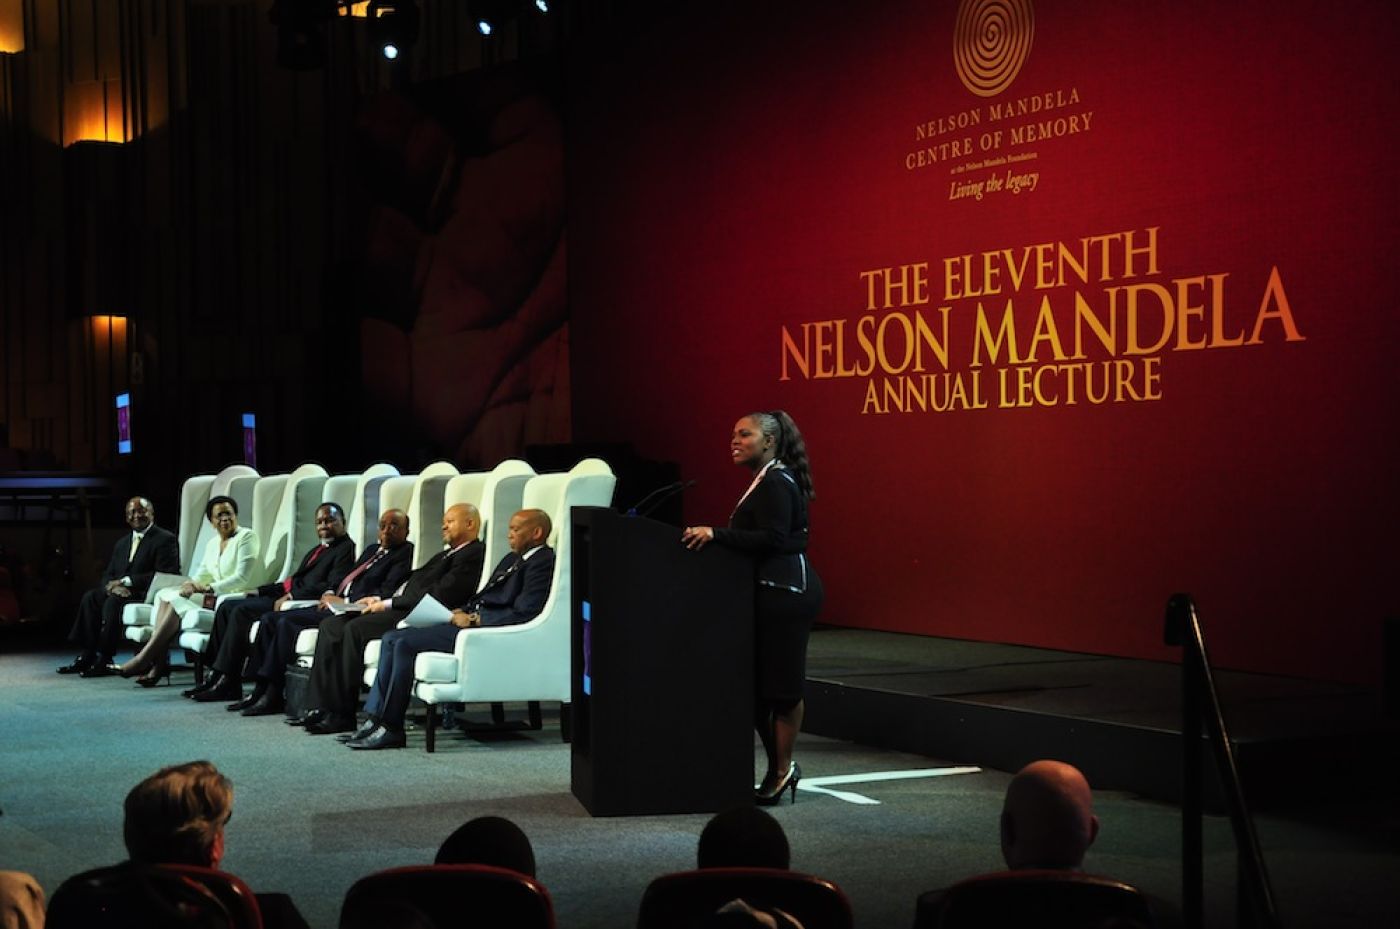 Mo Ibrahim on stage, 11th Nelson Mandela Annual Lecture